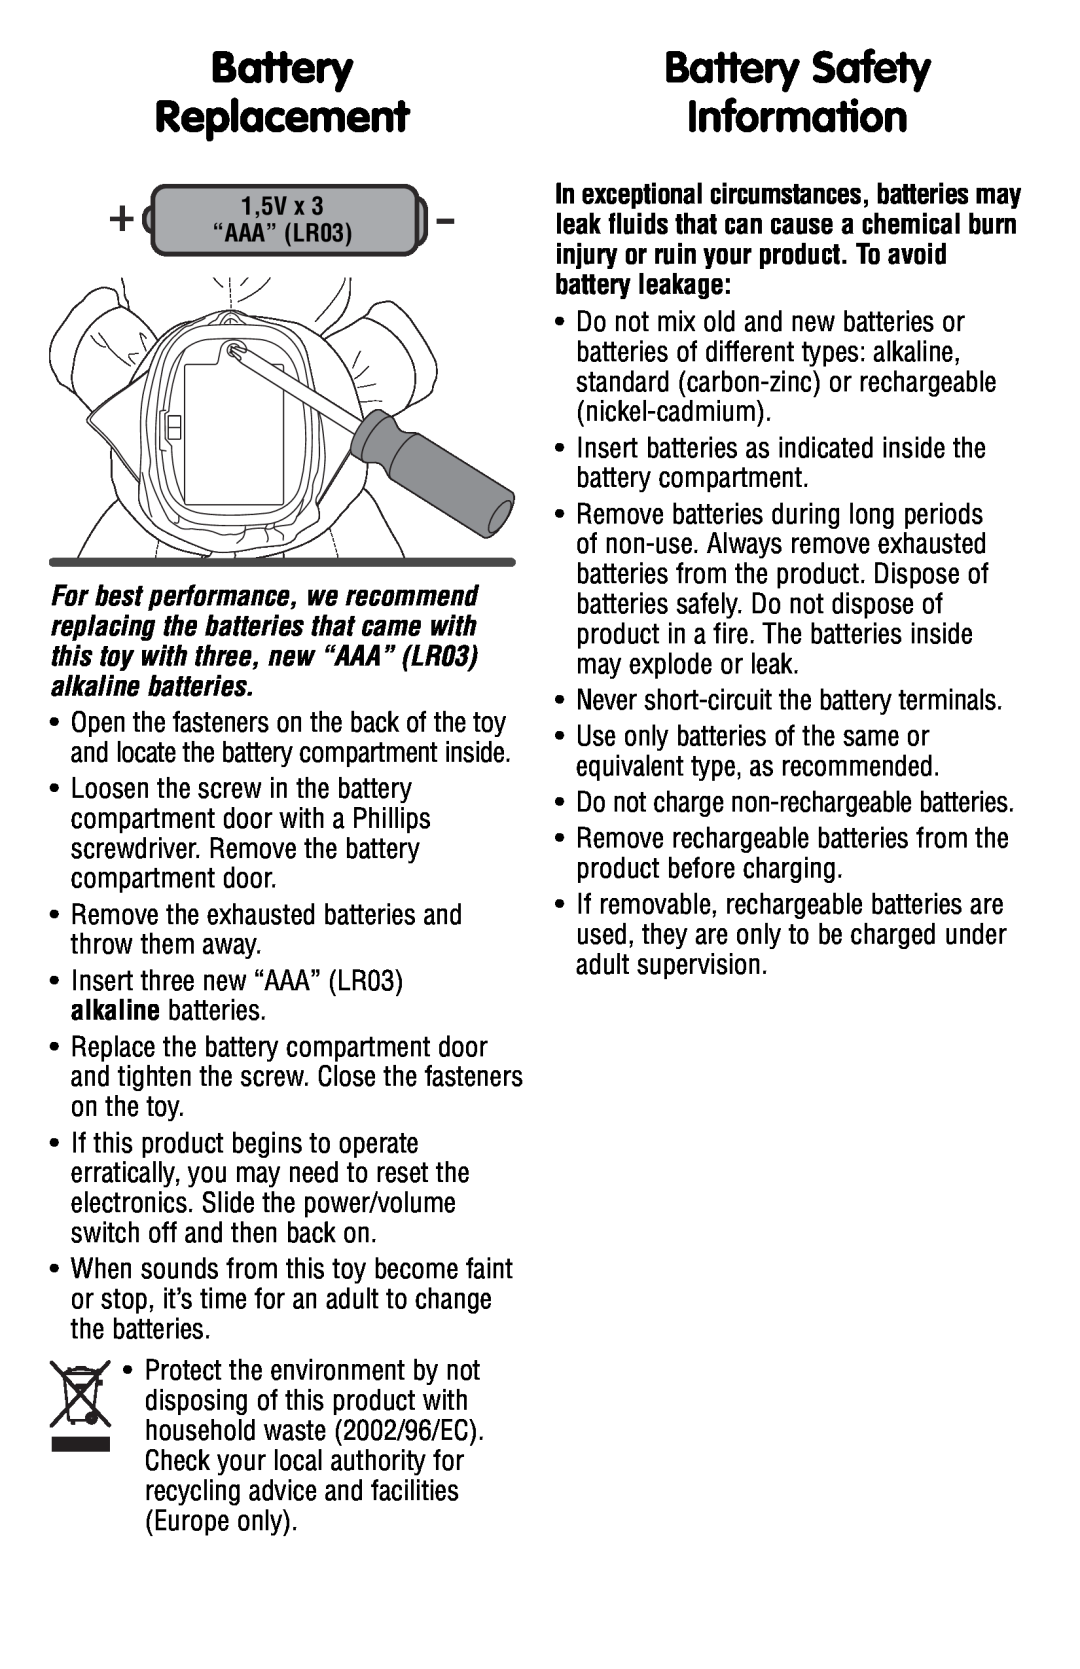 Fisher-Price P7687, P7695, P8600 instruction sheet Replacement, Information, Battery Safety 